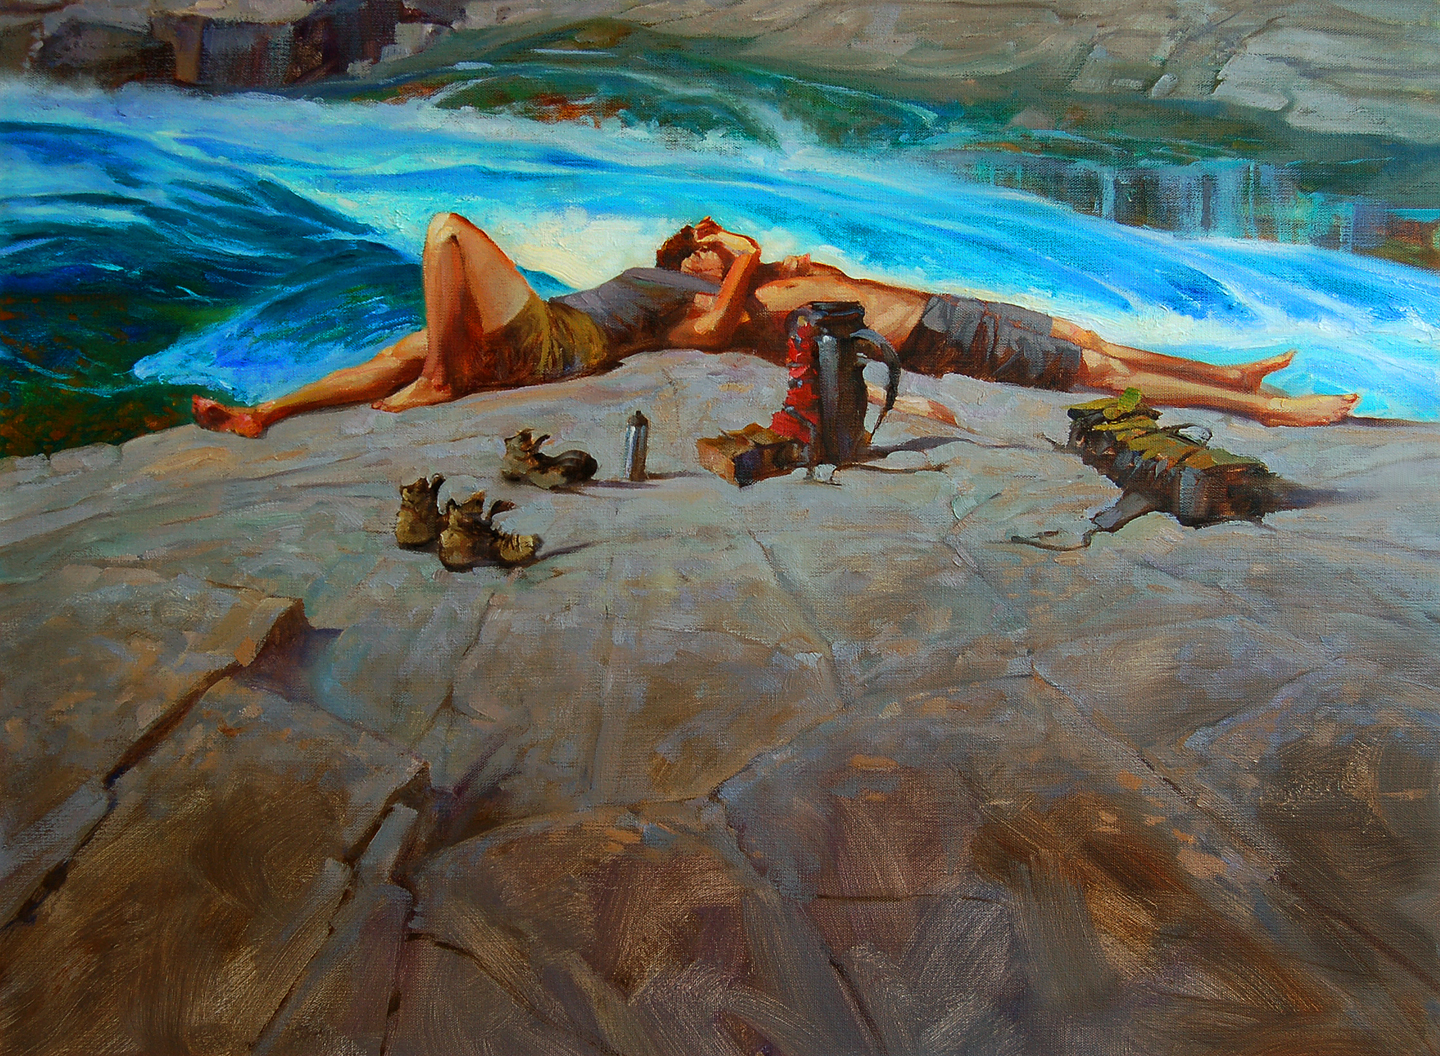 'Below the Falls' 30 X 40 in. oil on canvas. copyright Brent Lynch